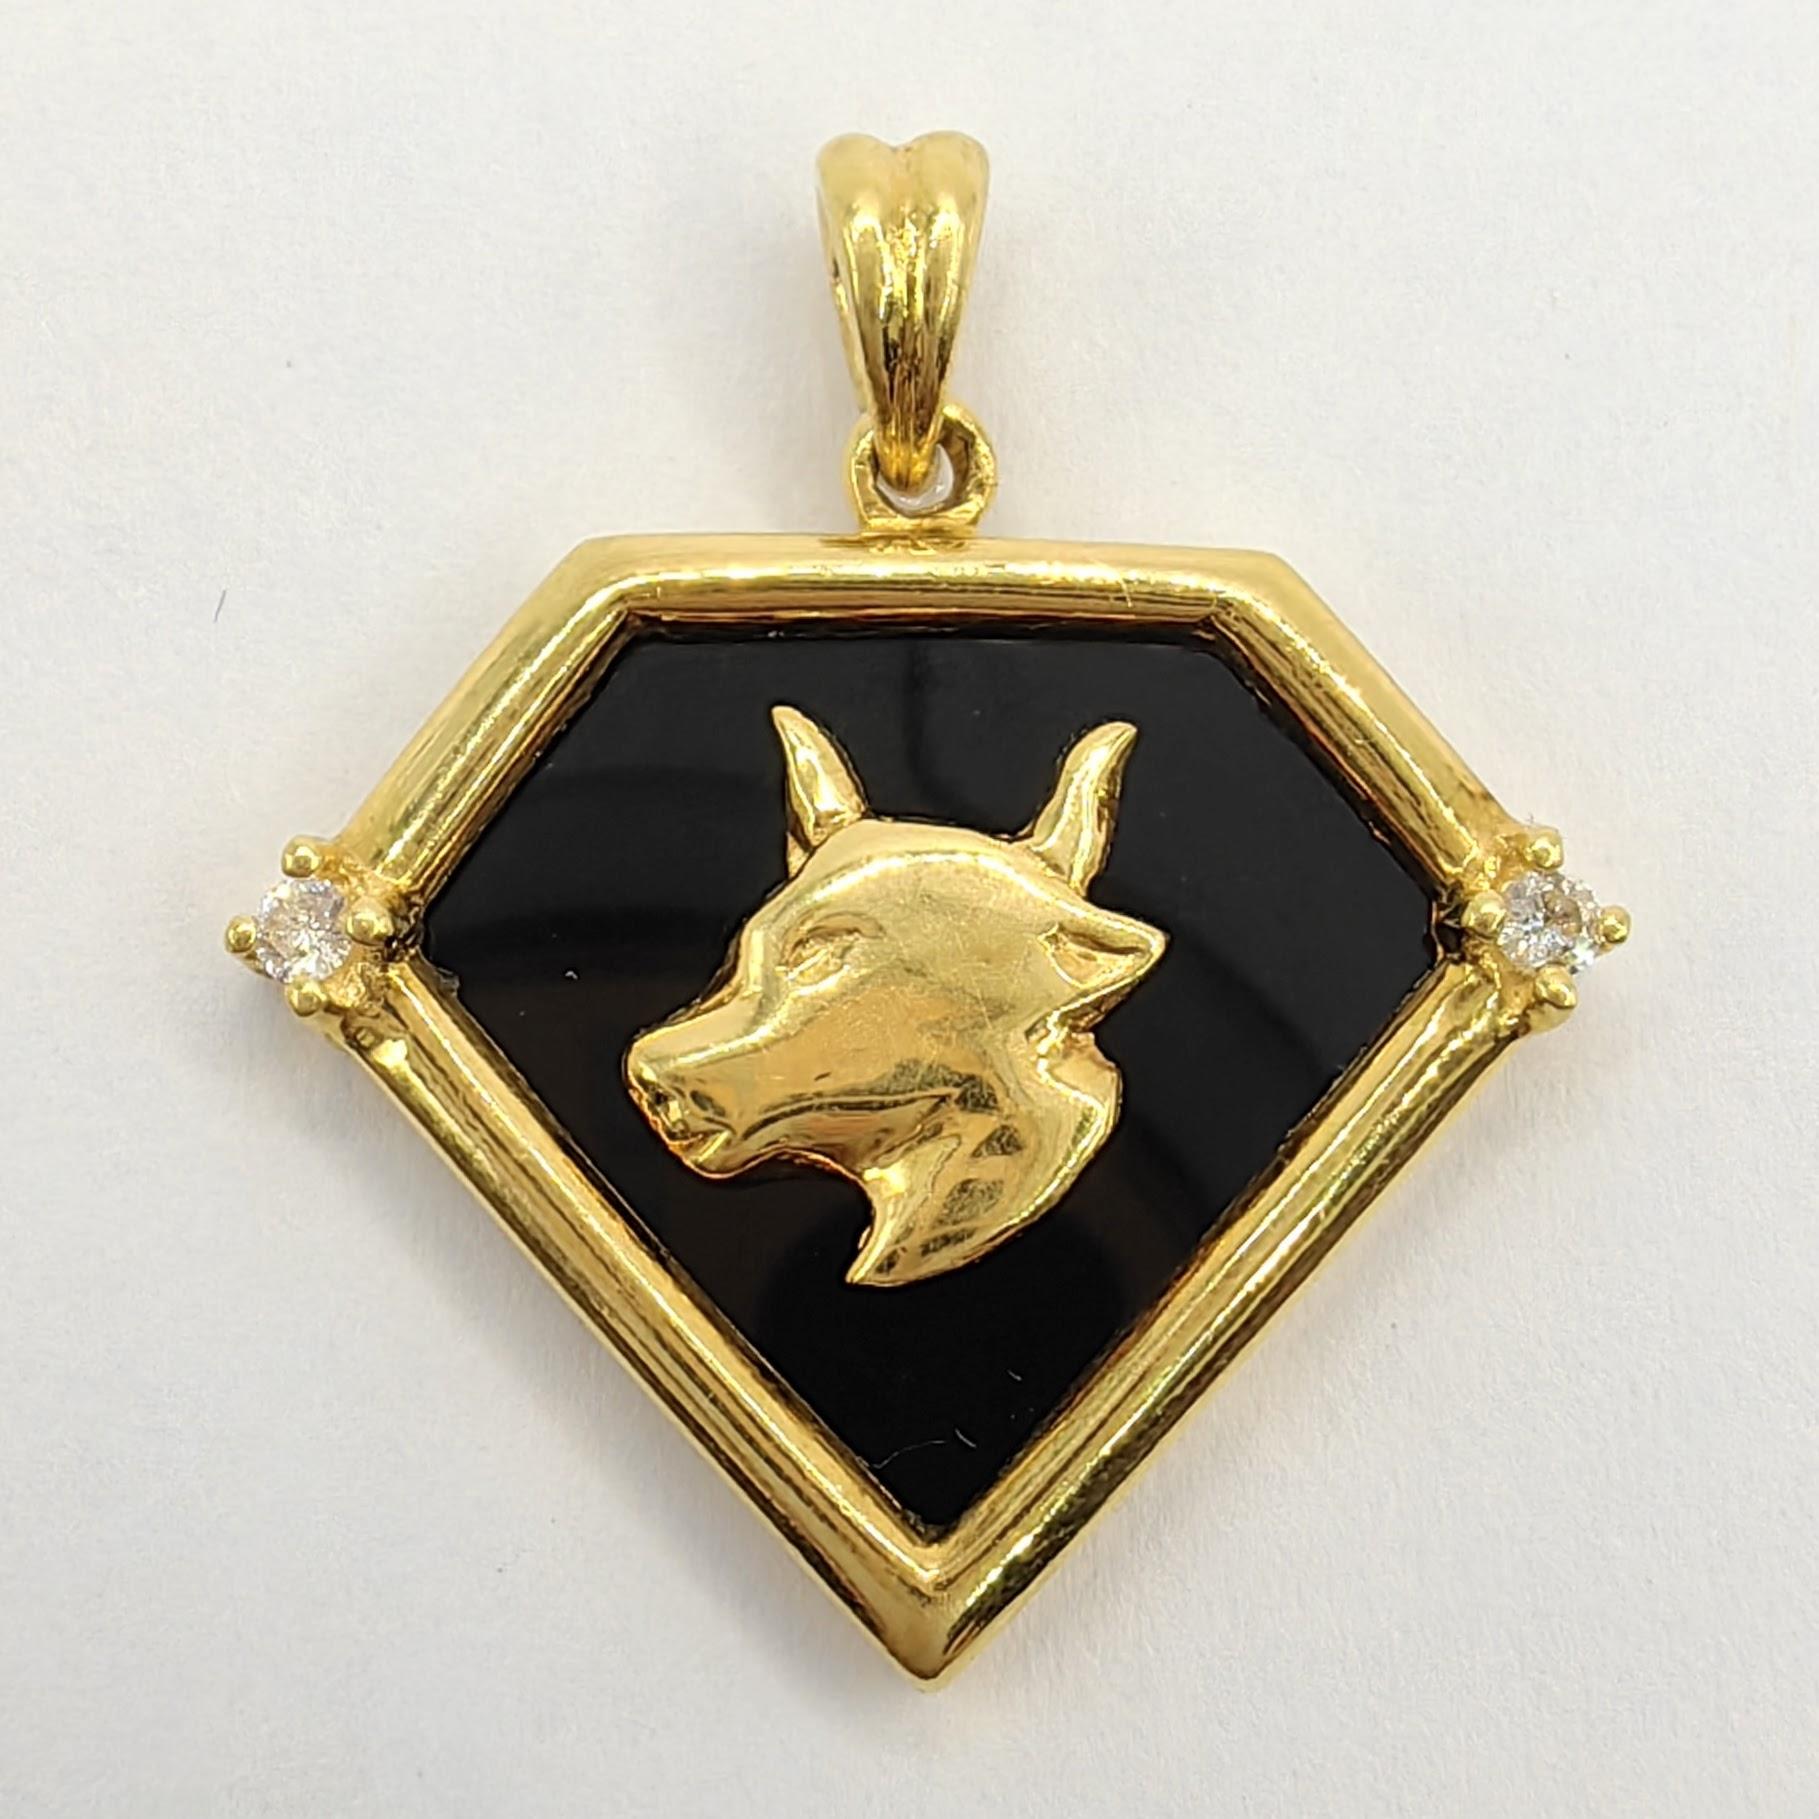 Introducing the Vintage 90's Taurus Onyx Diamond Necklace Pendant in 20K Yellow Gold. This exquisite pendant combines the allure of a diamond-shaped black onyx with the timeless elegance of 20K yellow gold. The onyx is beautifully framed by a gold